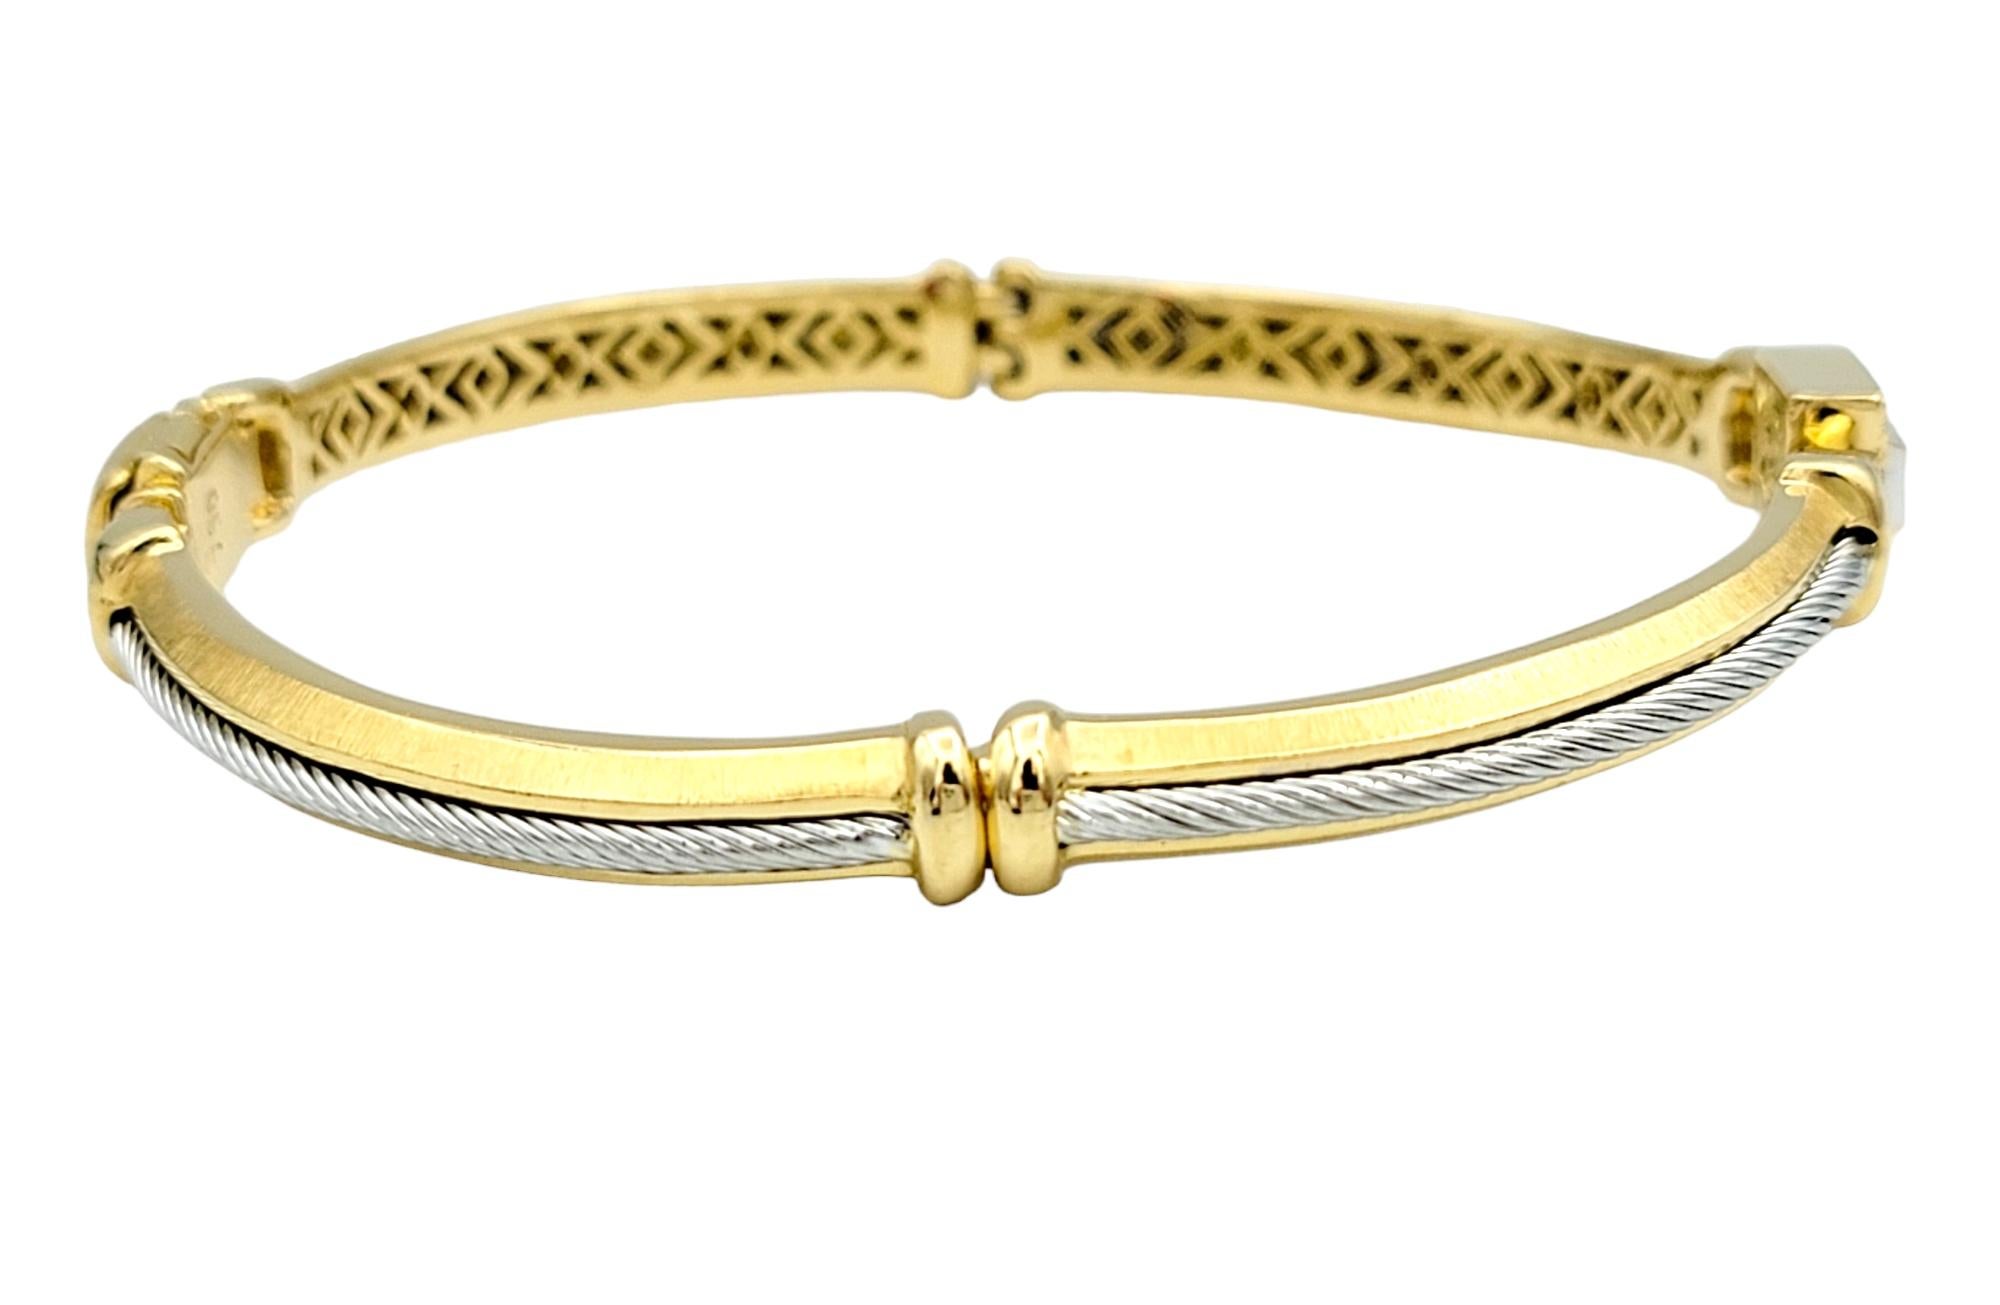 Contemporary Philippe Charriol Two Tone Bangle Bracelet in 18 Karat Gold and Stainless Steel